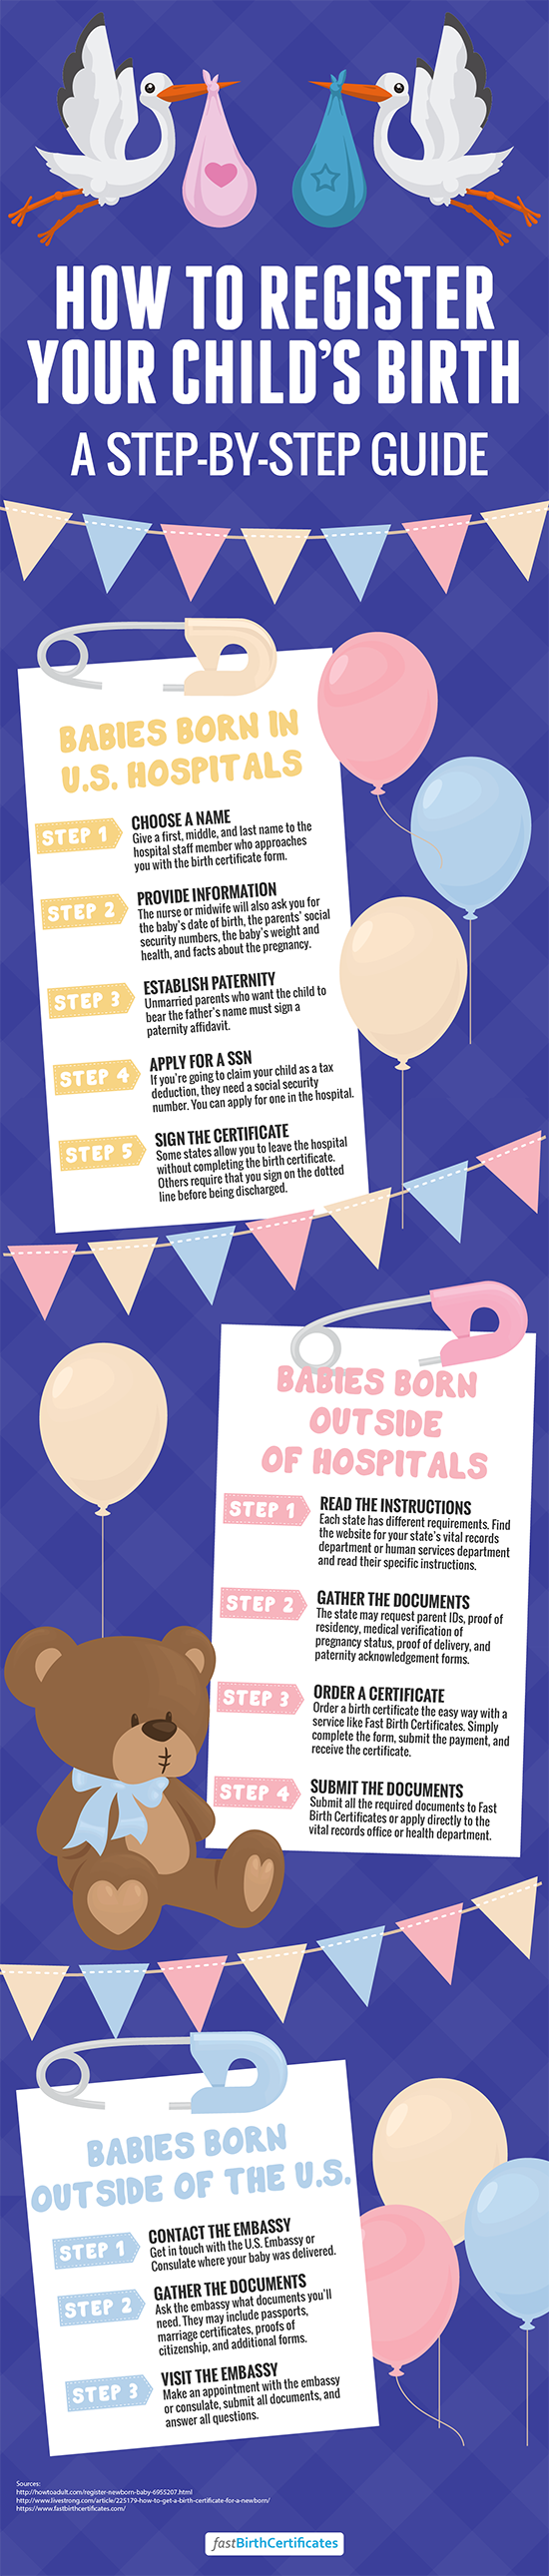 step by step guide to register a birth